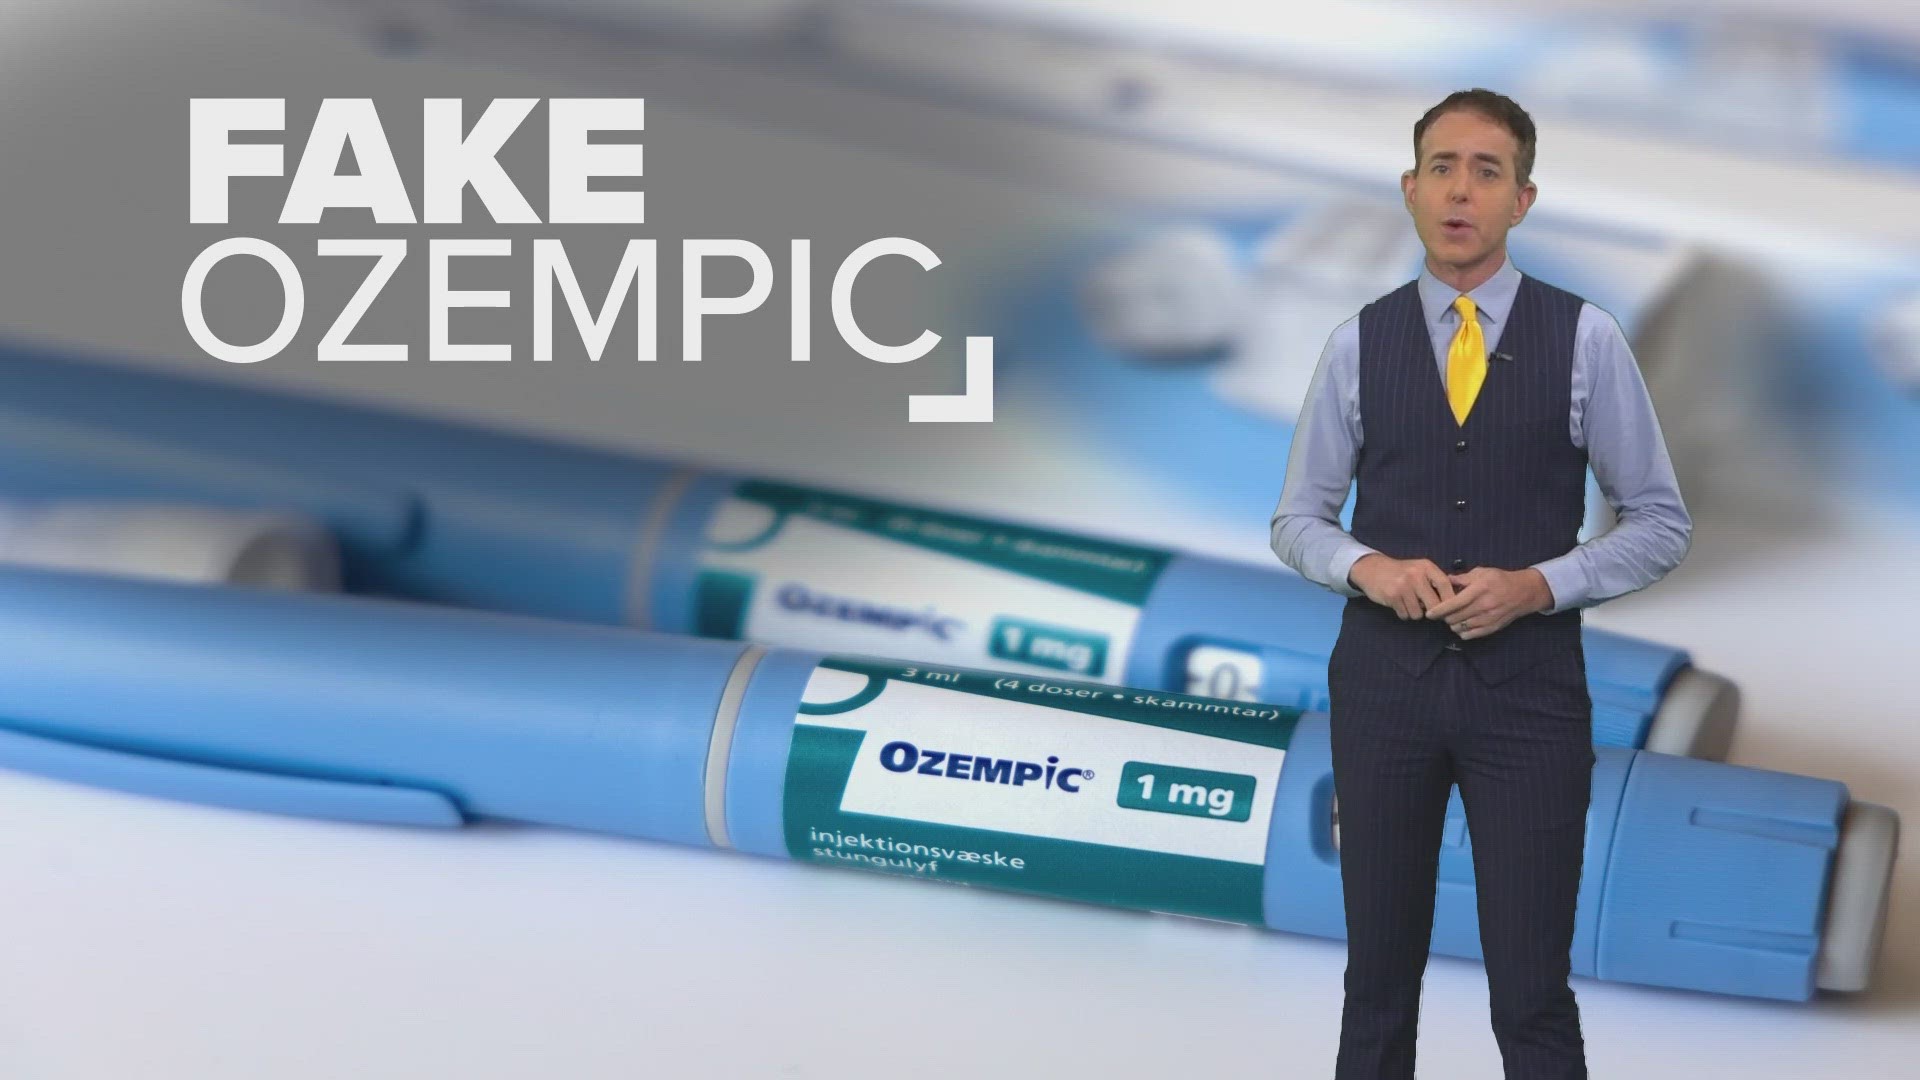 Many of the fake pens contain insulin, not semaglutide as in the real Ozempic